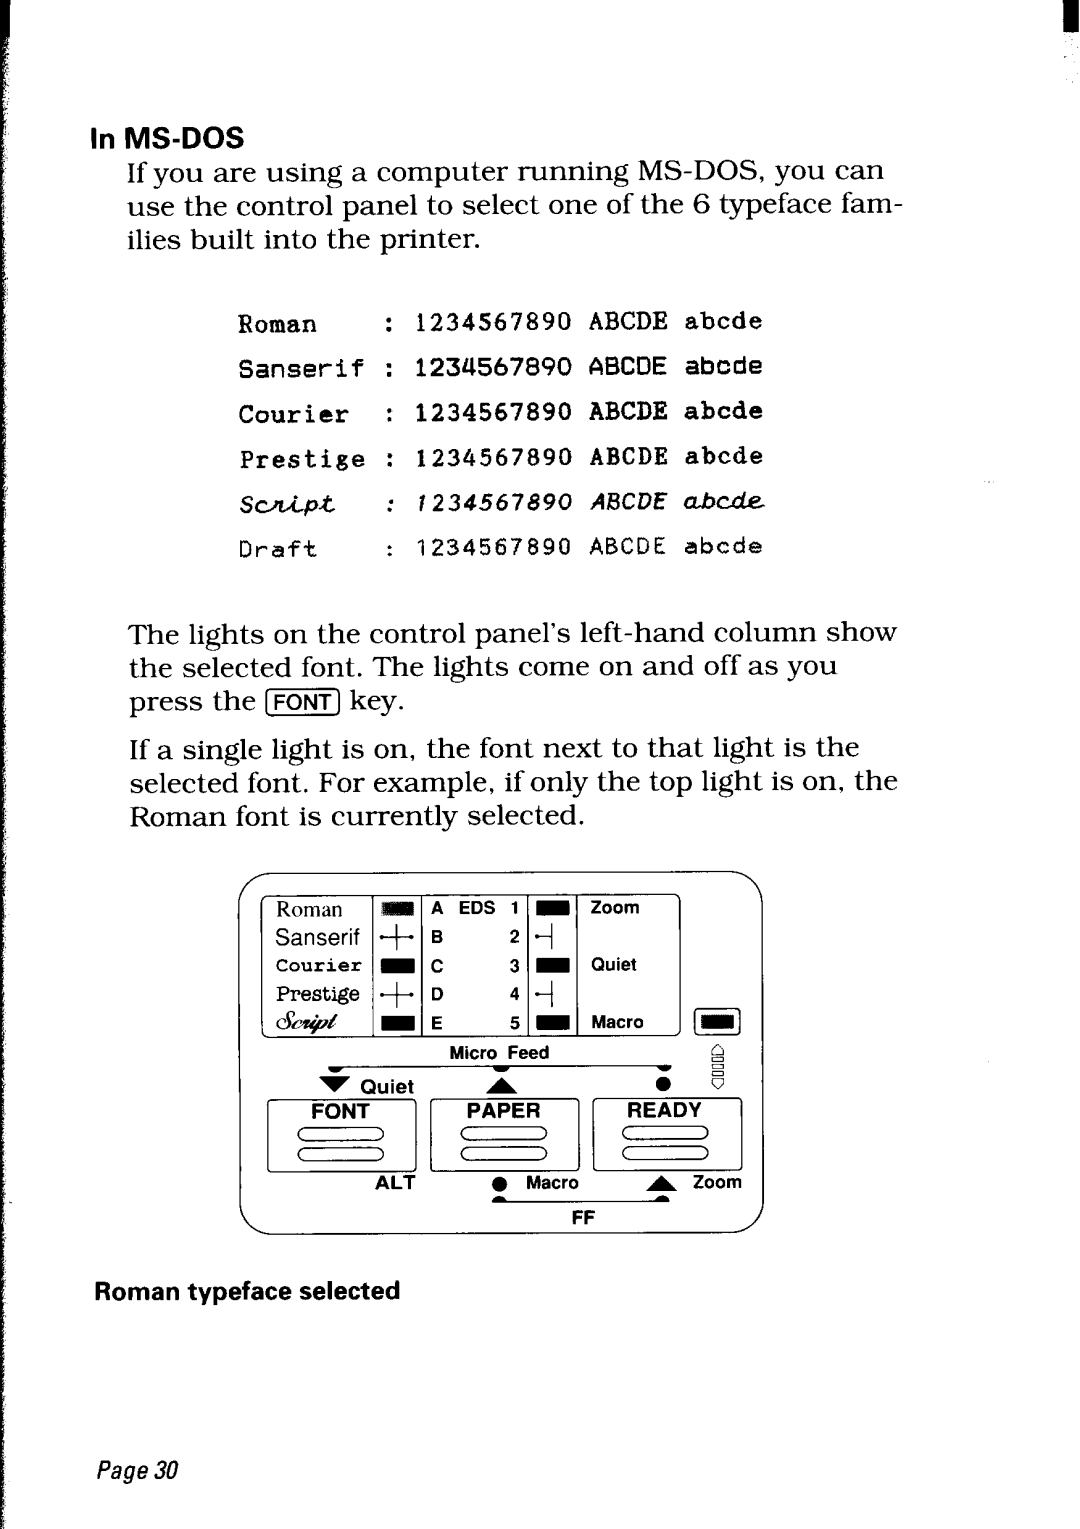 Star Micronics LC24-30 user manual In MS-DOS, press the FONTkey 